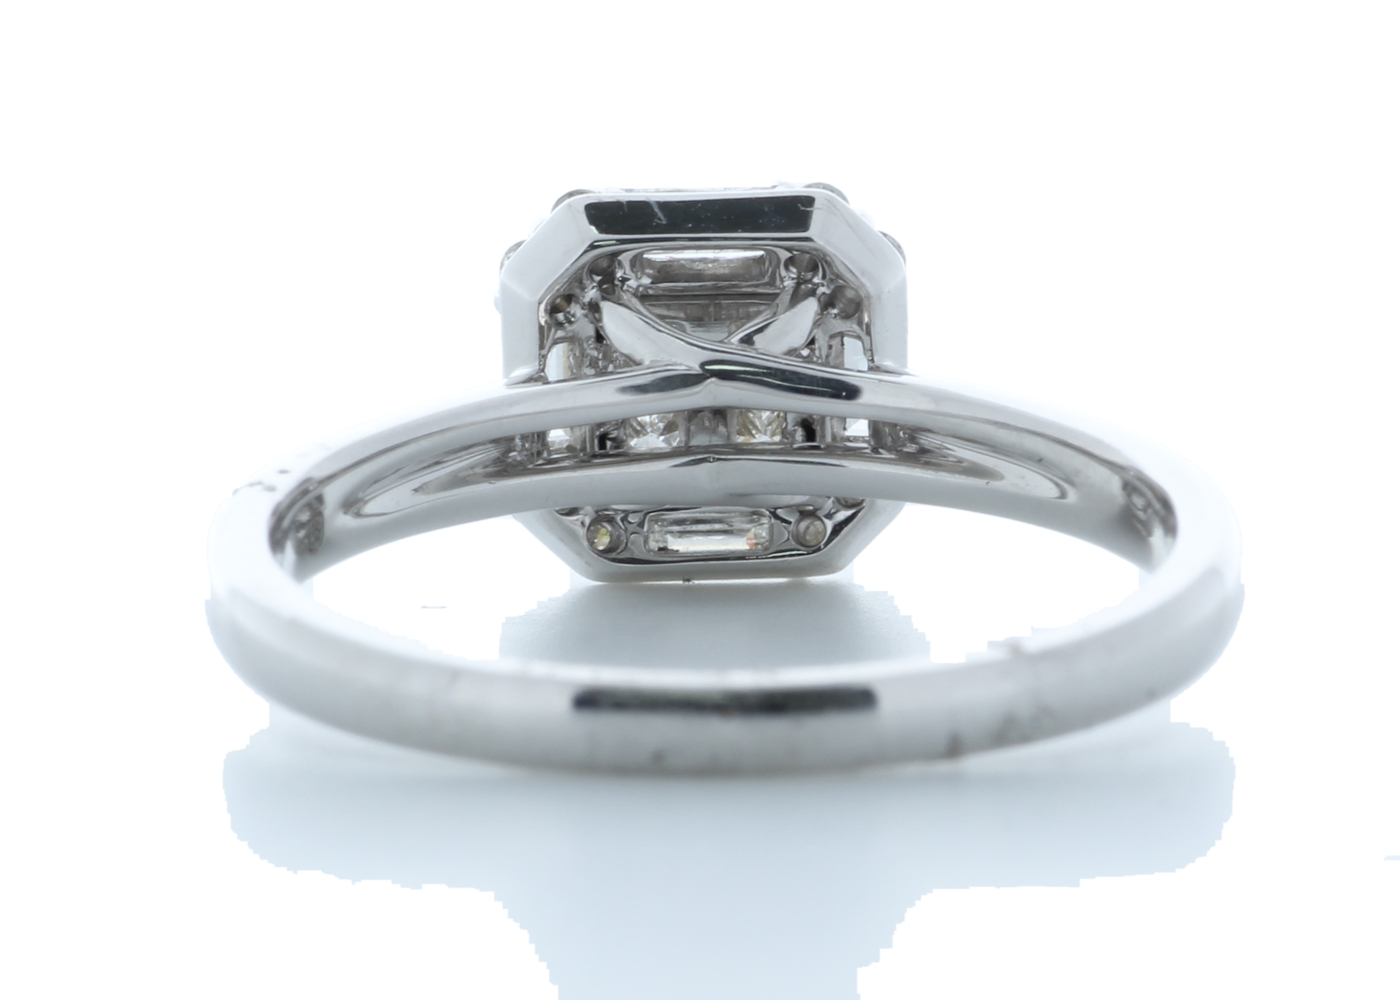 18ct White Gold Single Stone With Halo Setting Ring 0.55 Carats - Image 3 of 5